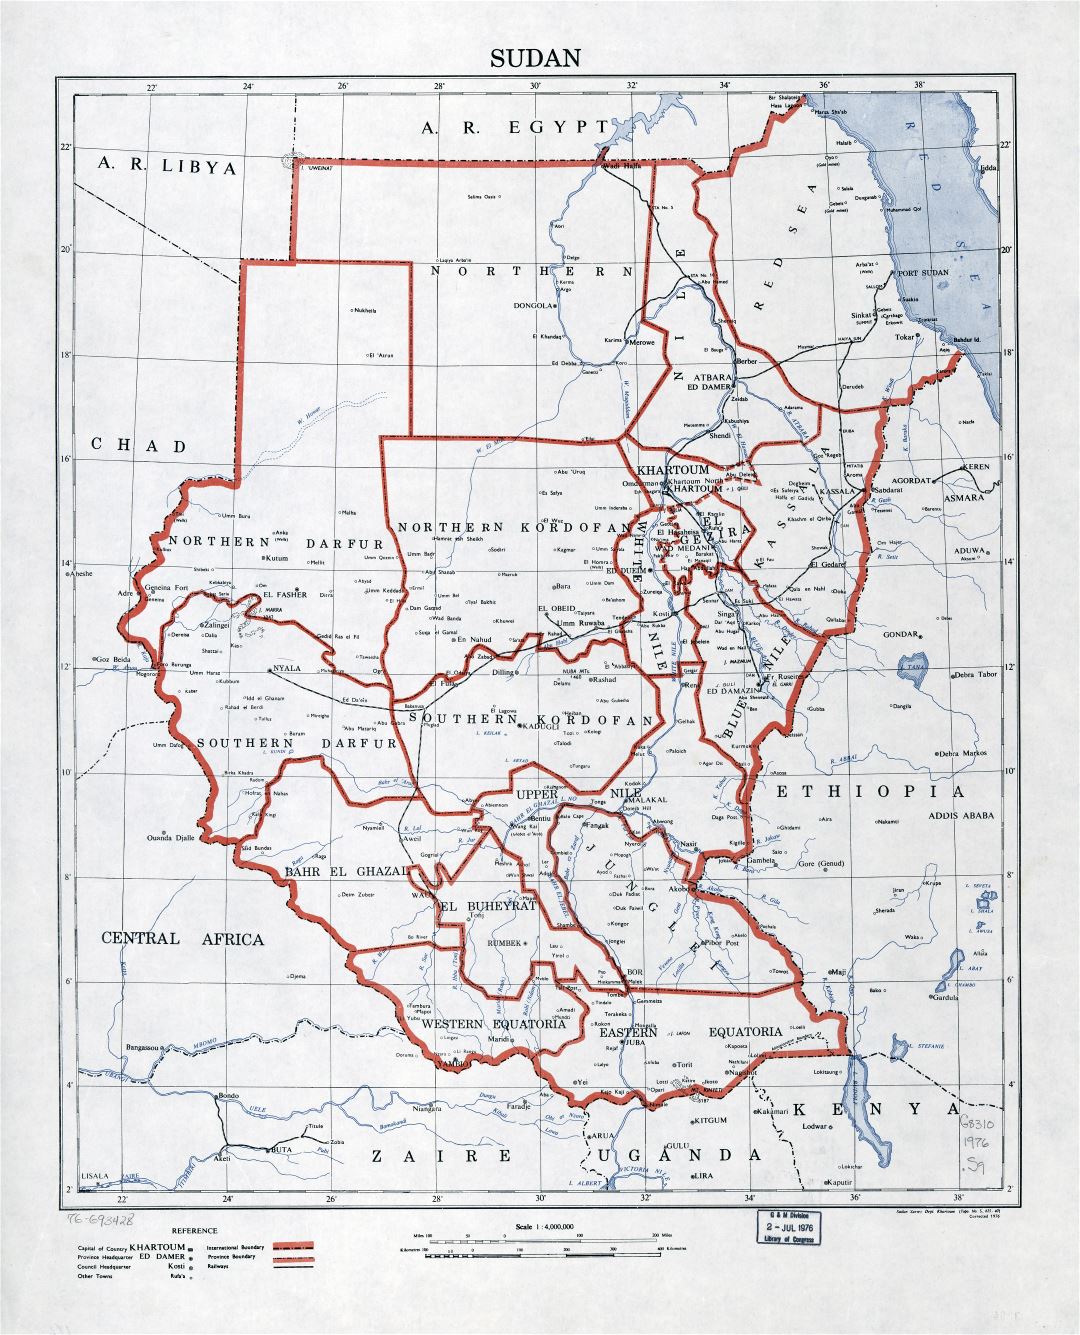 Large scale detailed political and administrative map of Sudan with railroads and cities - 1976